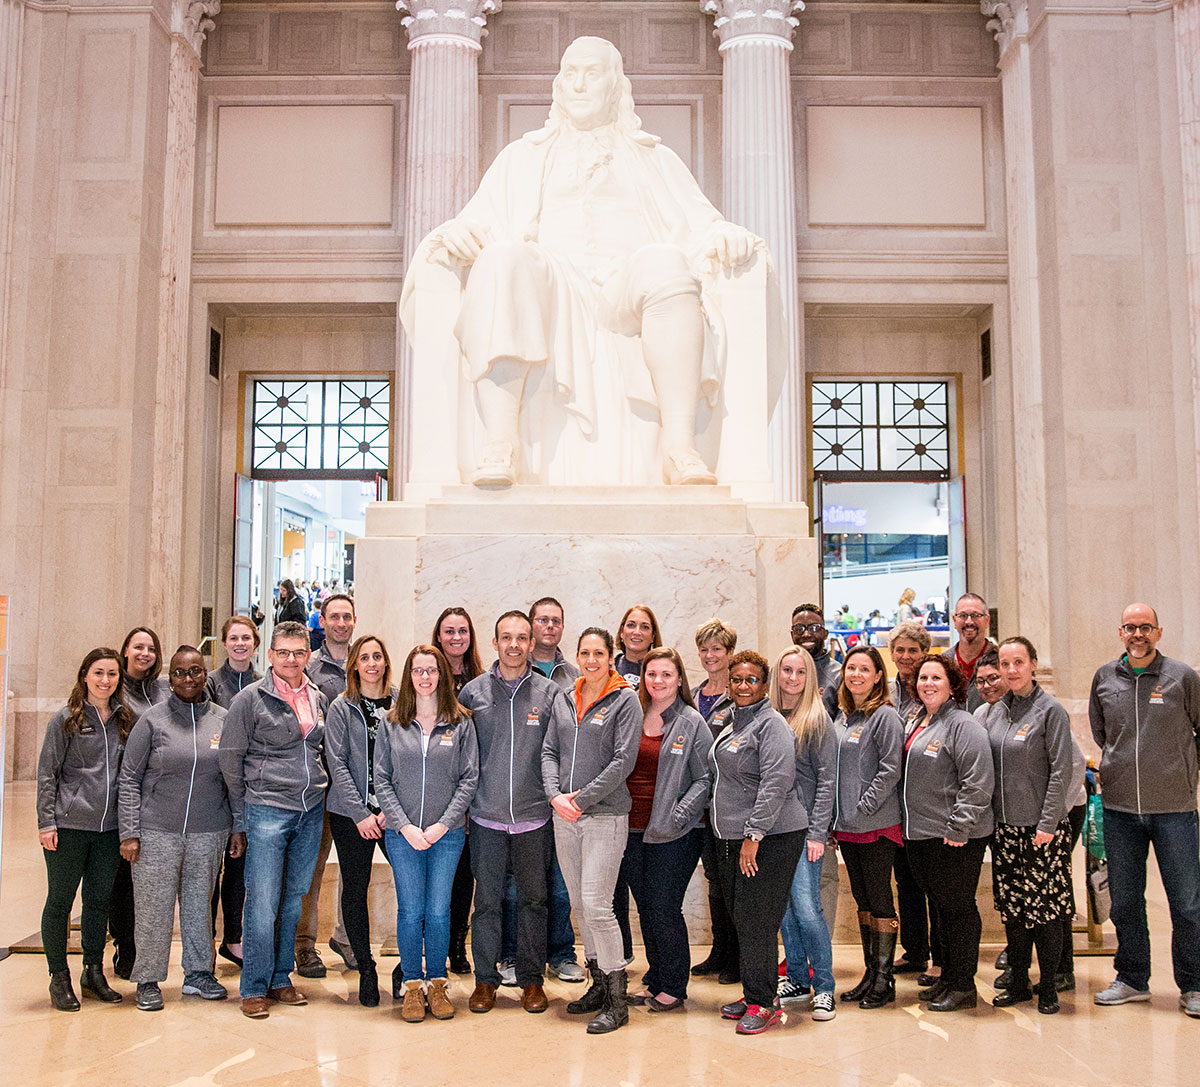 The 2018 class of Master Educators gathers at the Benjamin Franklin Memorial at The Franklin Institute in Philadelphia.